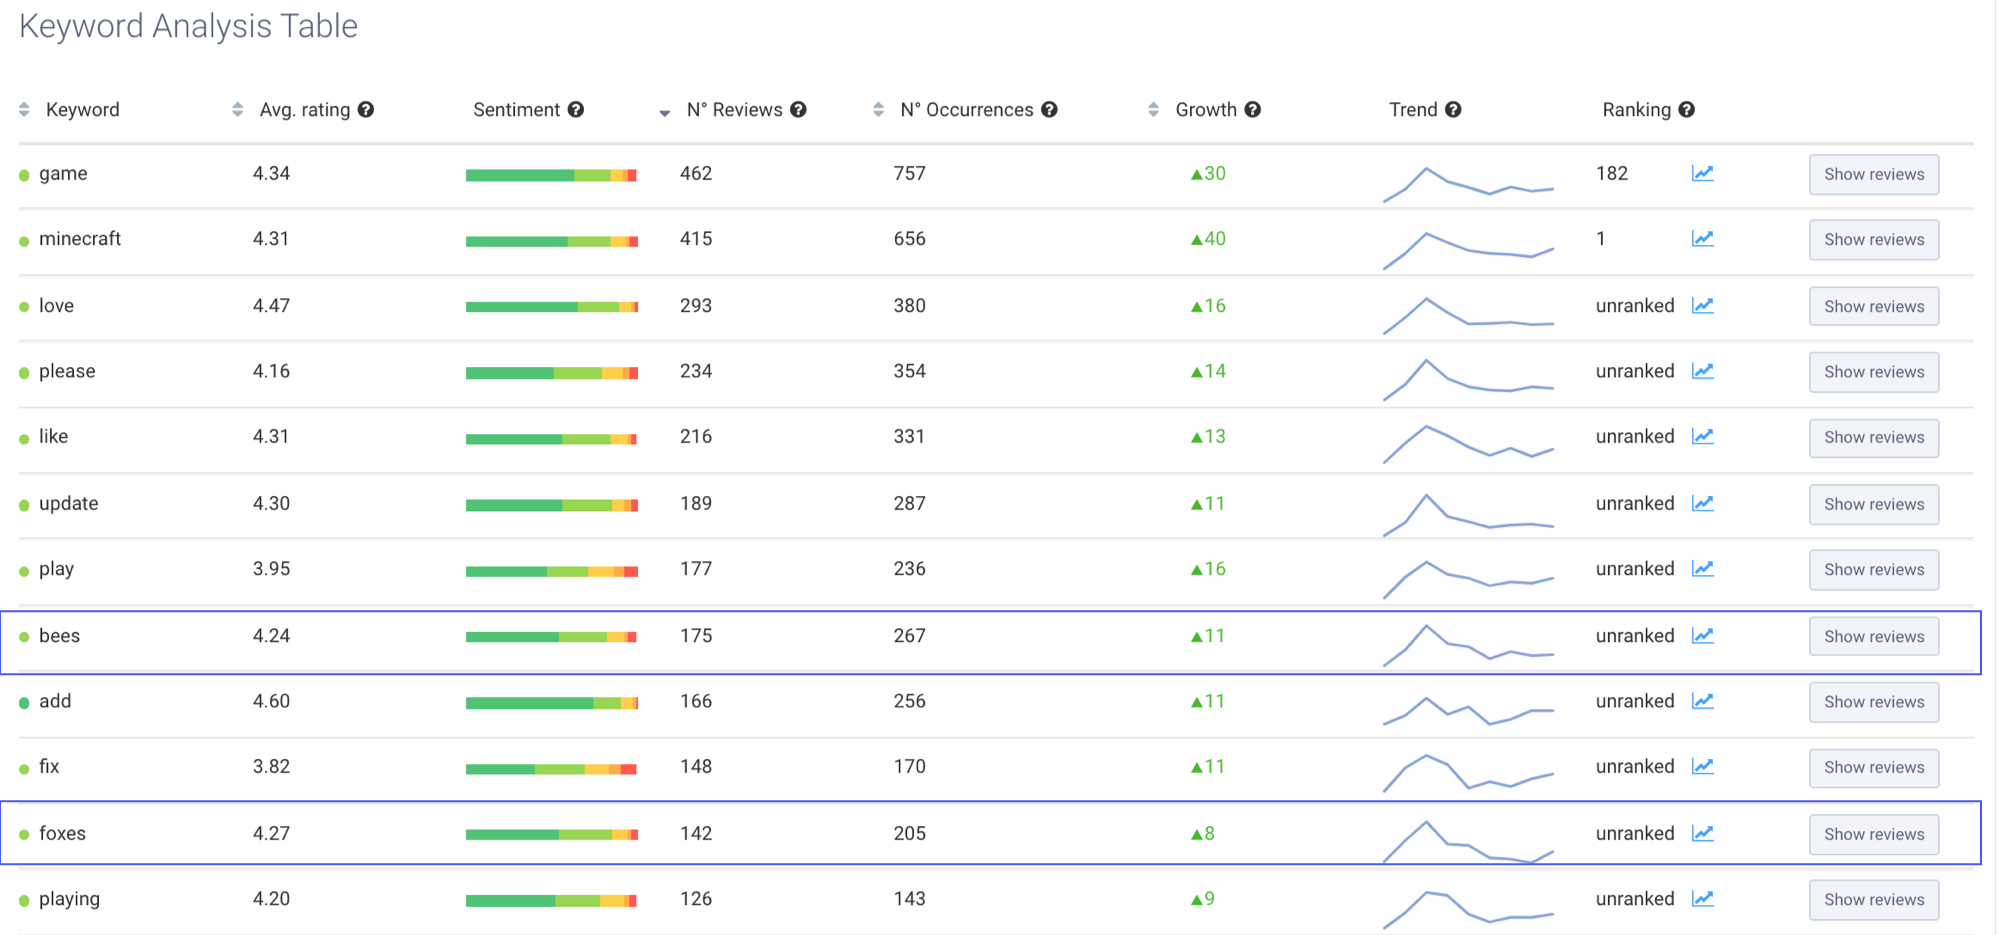 AppTweak ASO Tool Reviews Sentiment Analysis - “bees” and “foxes” appear among the top 12 most repeated keywords of Minecraft’s reviews in August 2019 (iOS US).